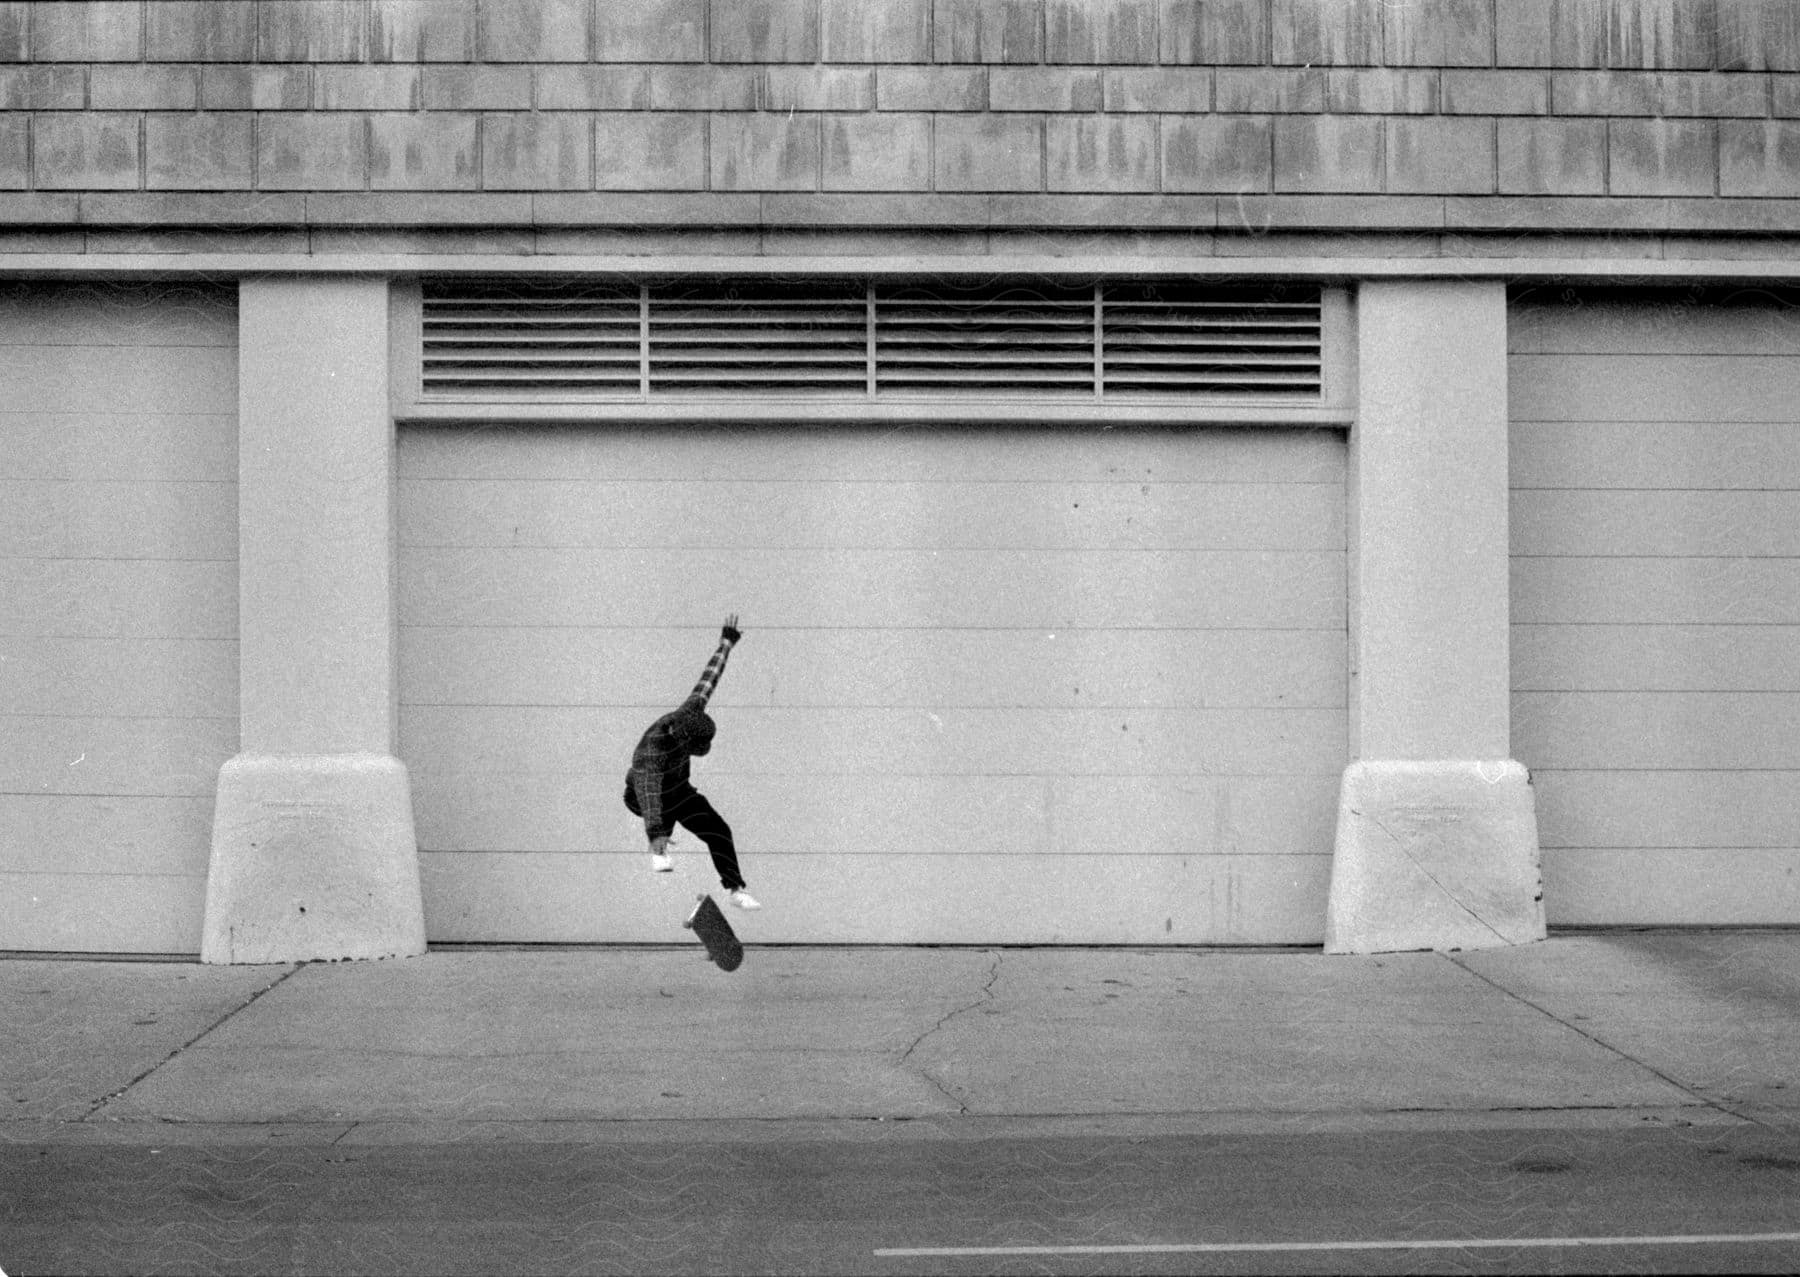 A skateboarder performs tricks while skating on a sidewalk outside a building